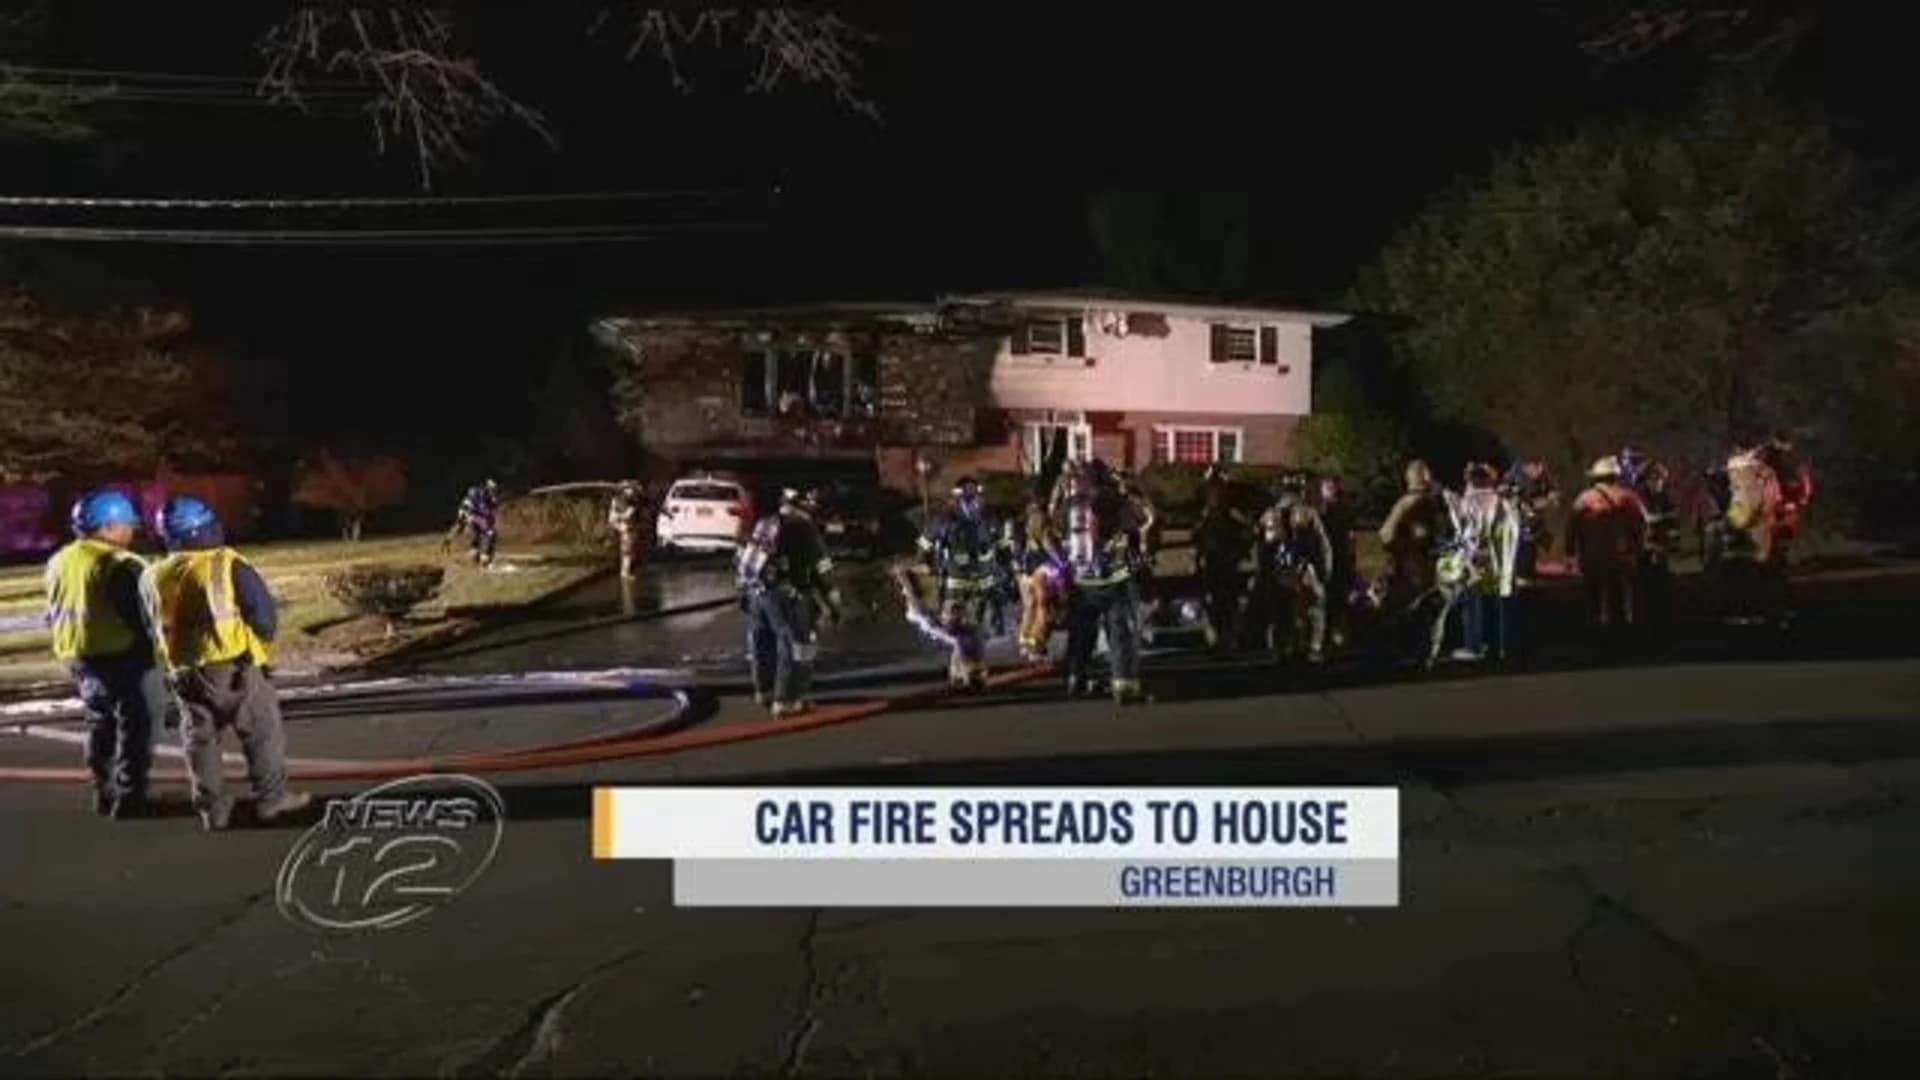 Fire engulfs two cars, damages home in Greenburgh